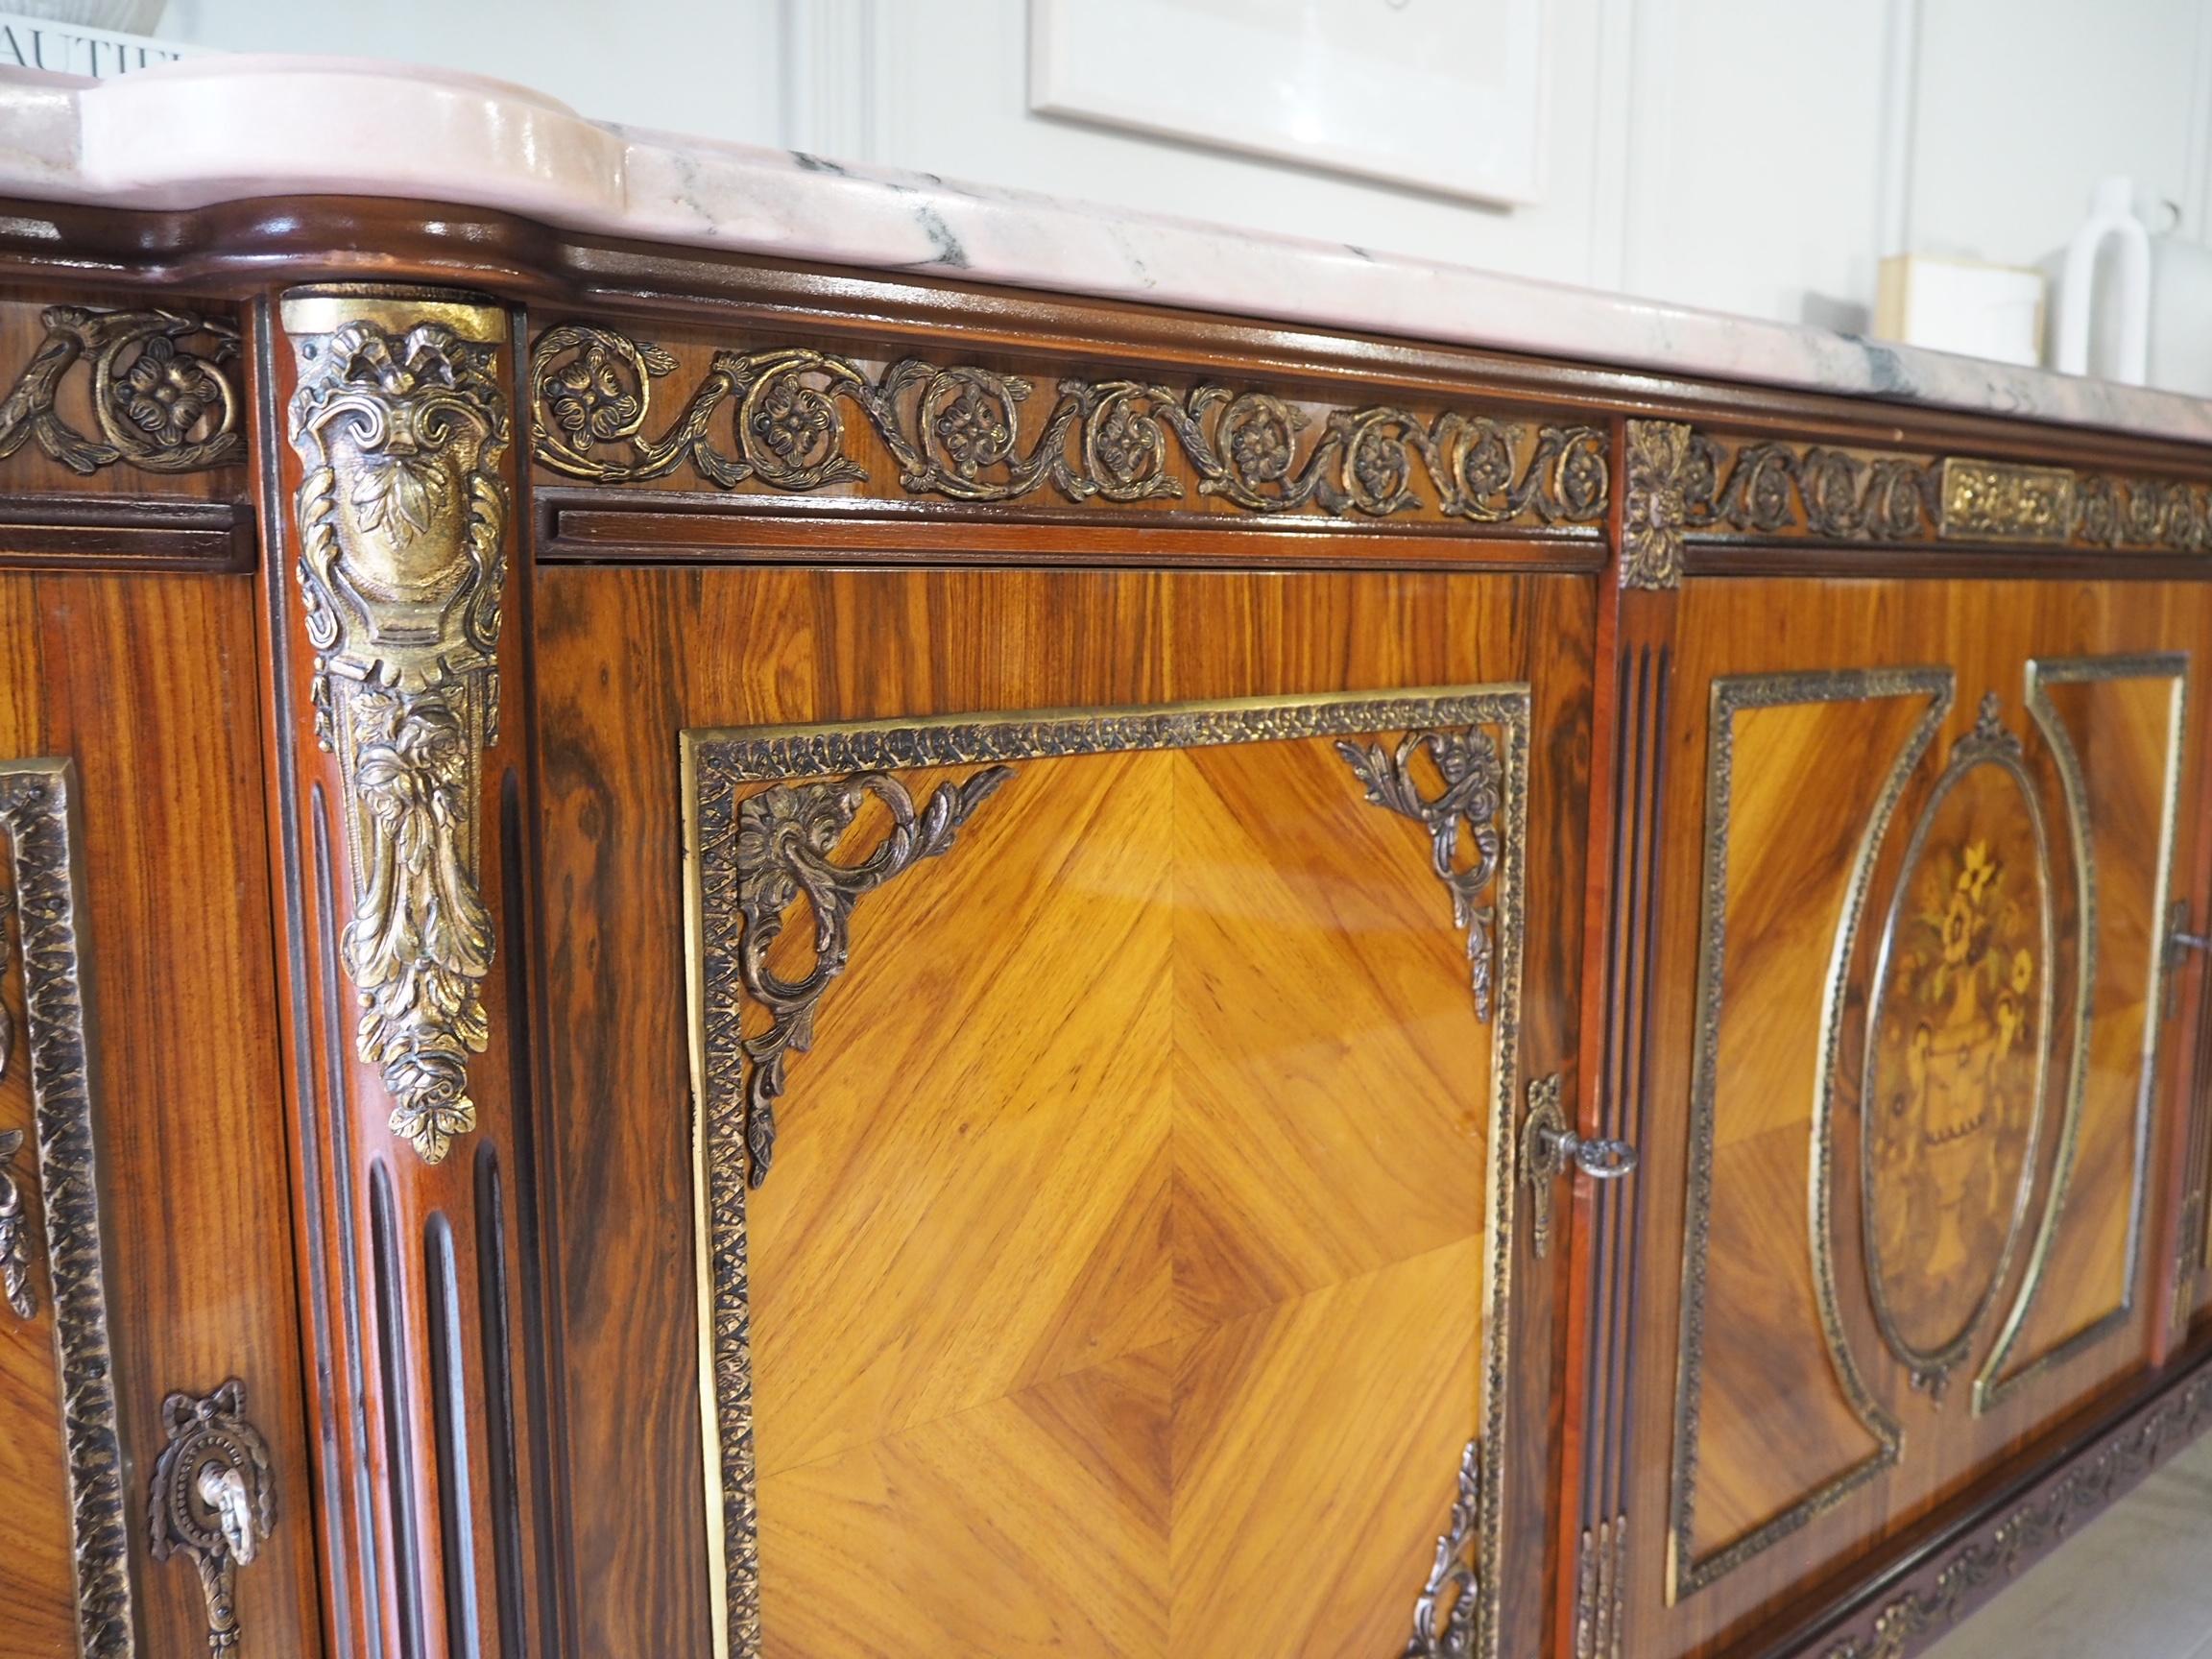 A beautiful French Louis XVI style mahogany sideboard made by JP Ehalt (name inside left cabinet), circa 20th century with a marble top, above the body where there are lovely elaborate marquetry inlays, featuring flower vases.


It has gilt metal